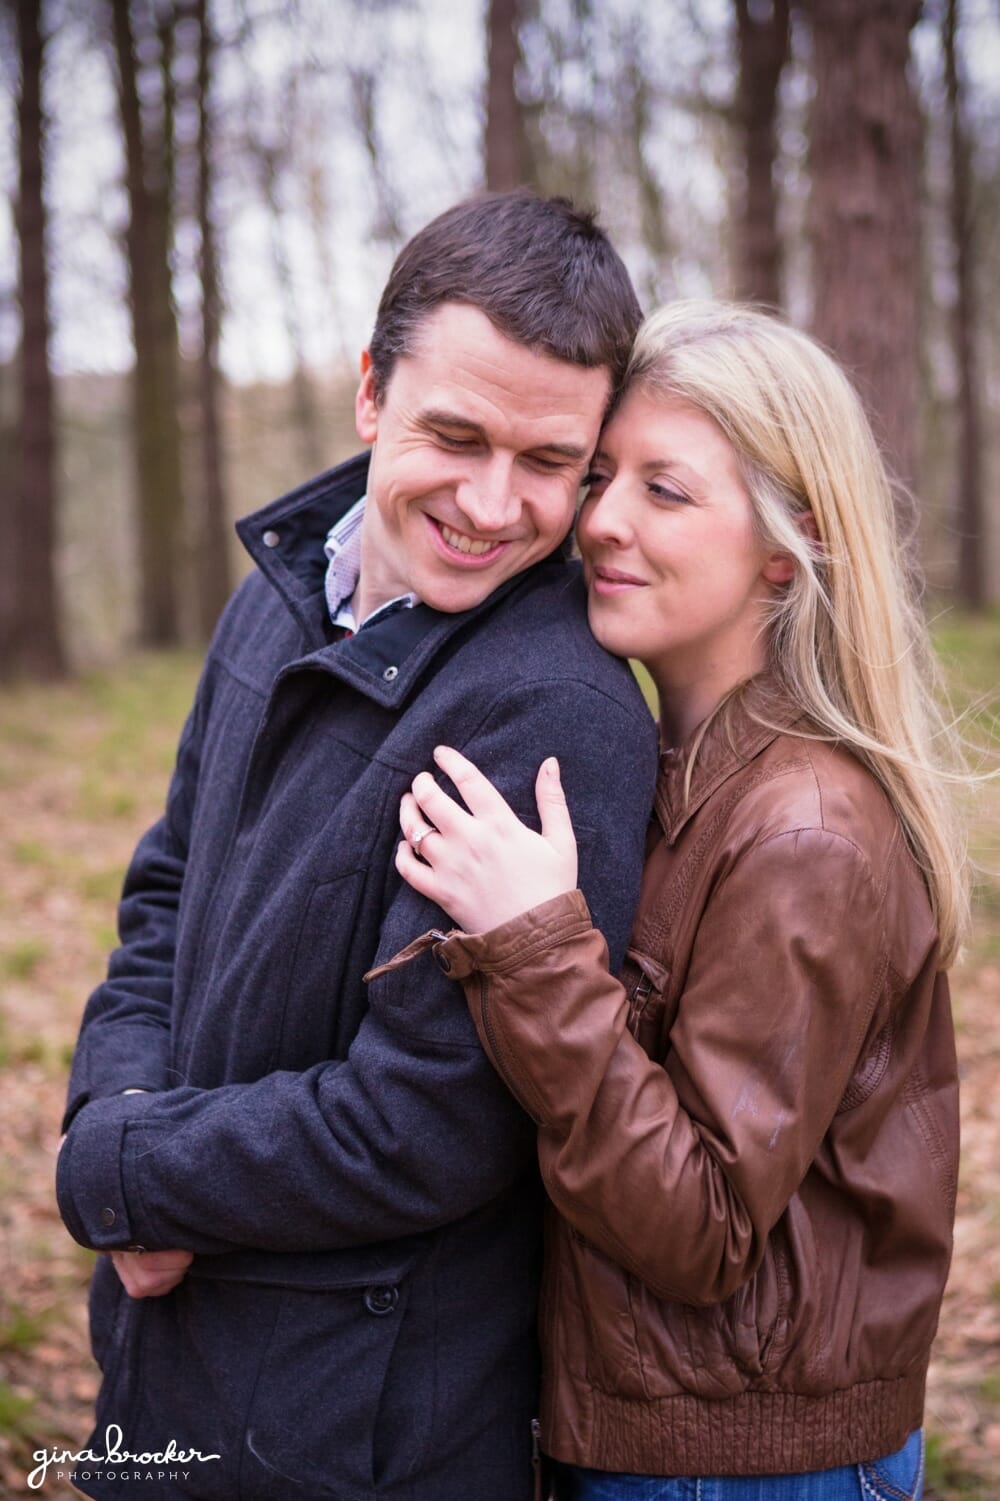 A sweet photograph of couple cuddling during their Boston Engagement Session in Arnold Arboretum